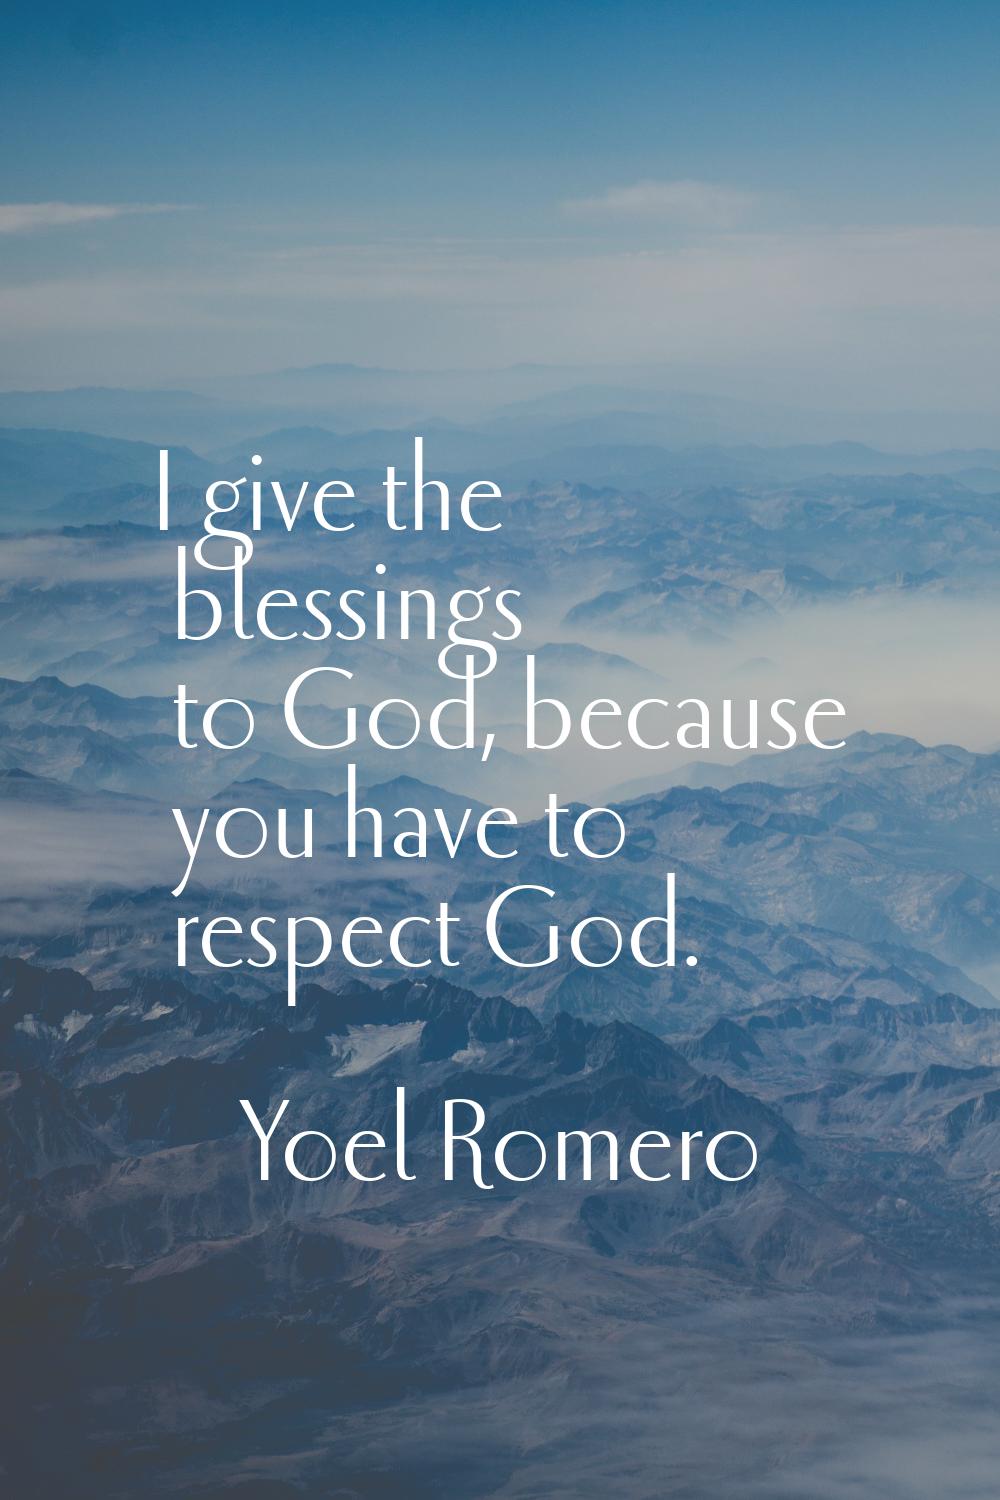 I give the blessings to God, because you have to respect God.